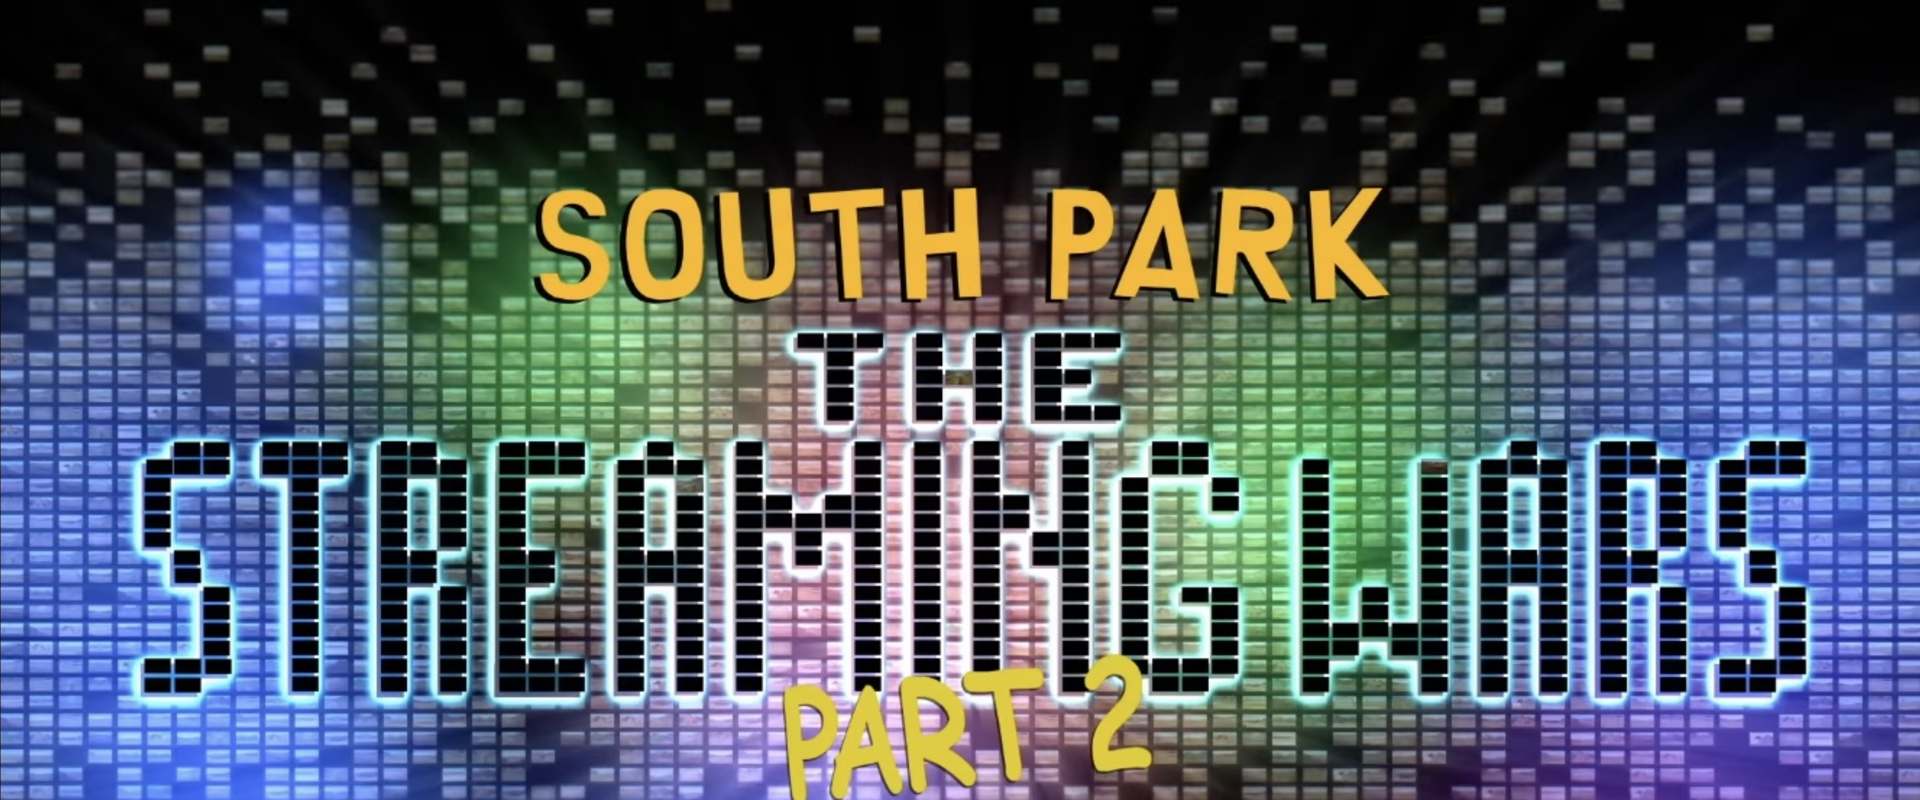 South Park the Streaming Wars Part 2 background 1